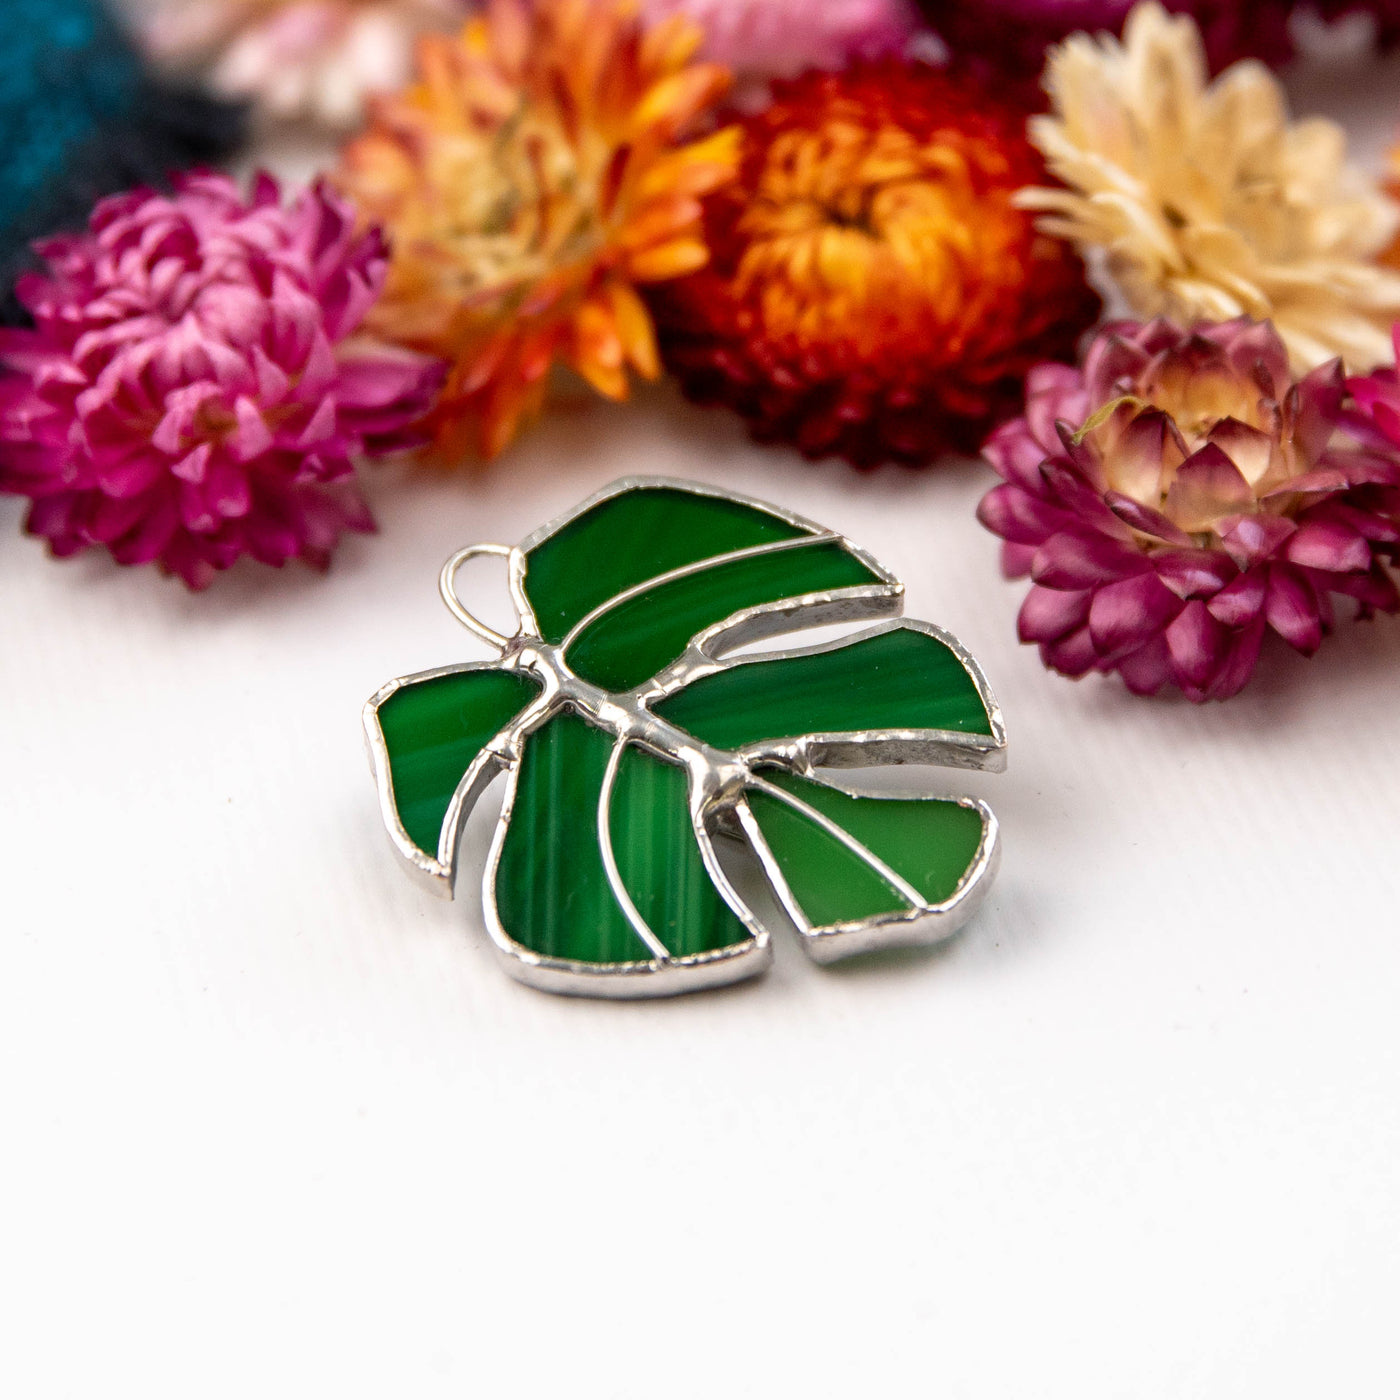 Stained glass monstera leaf pin